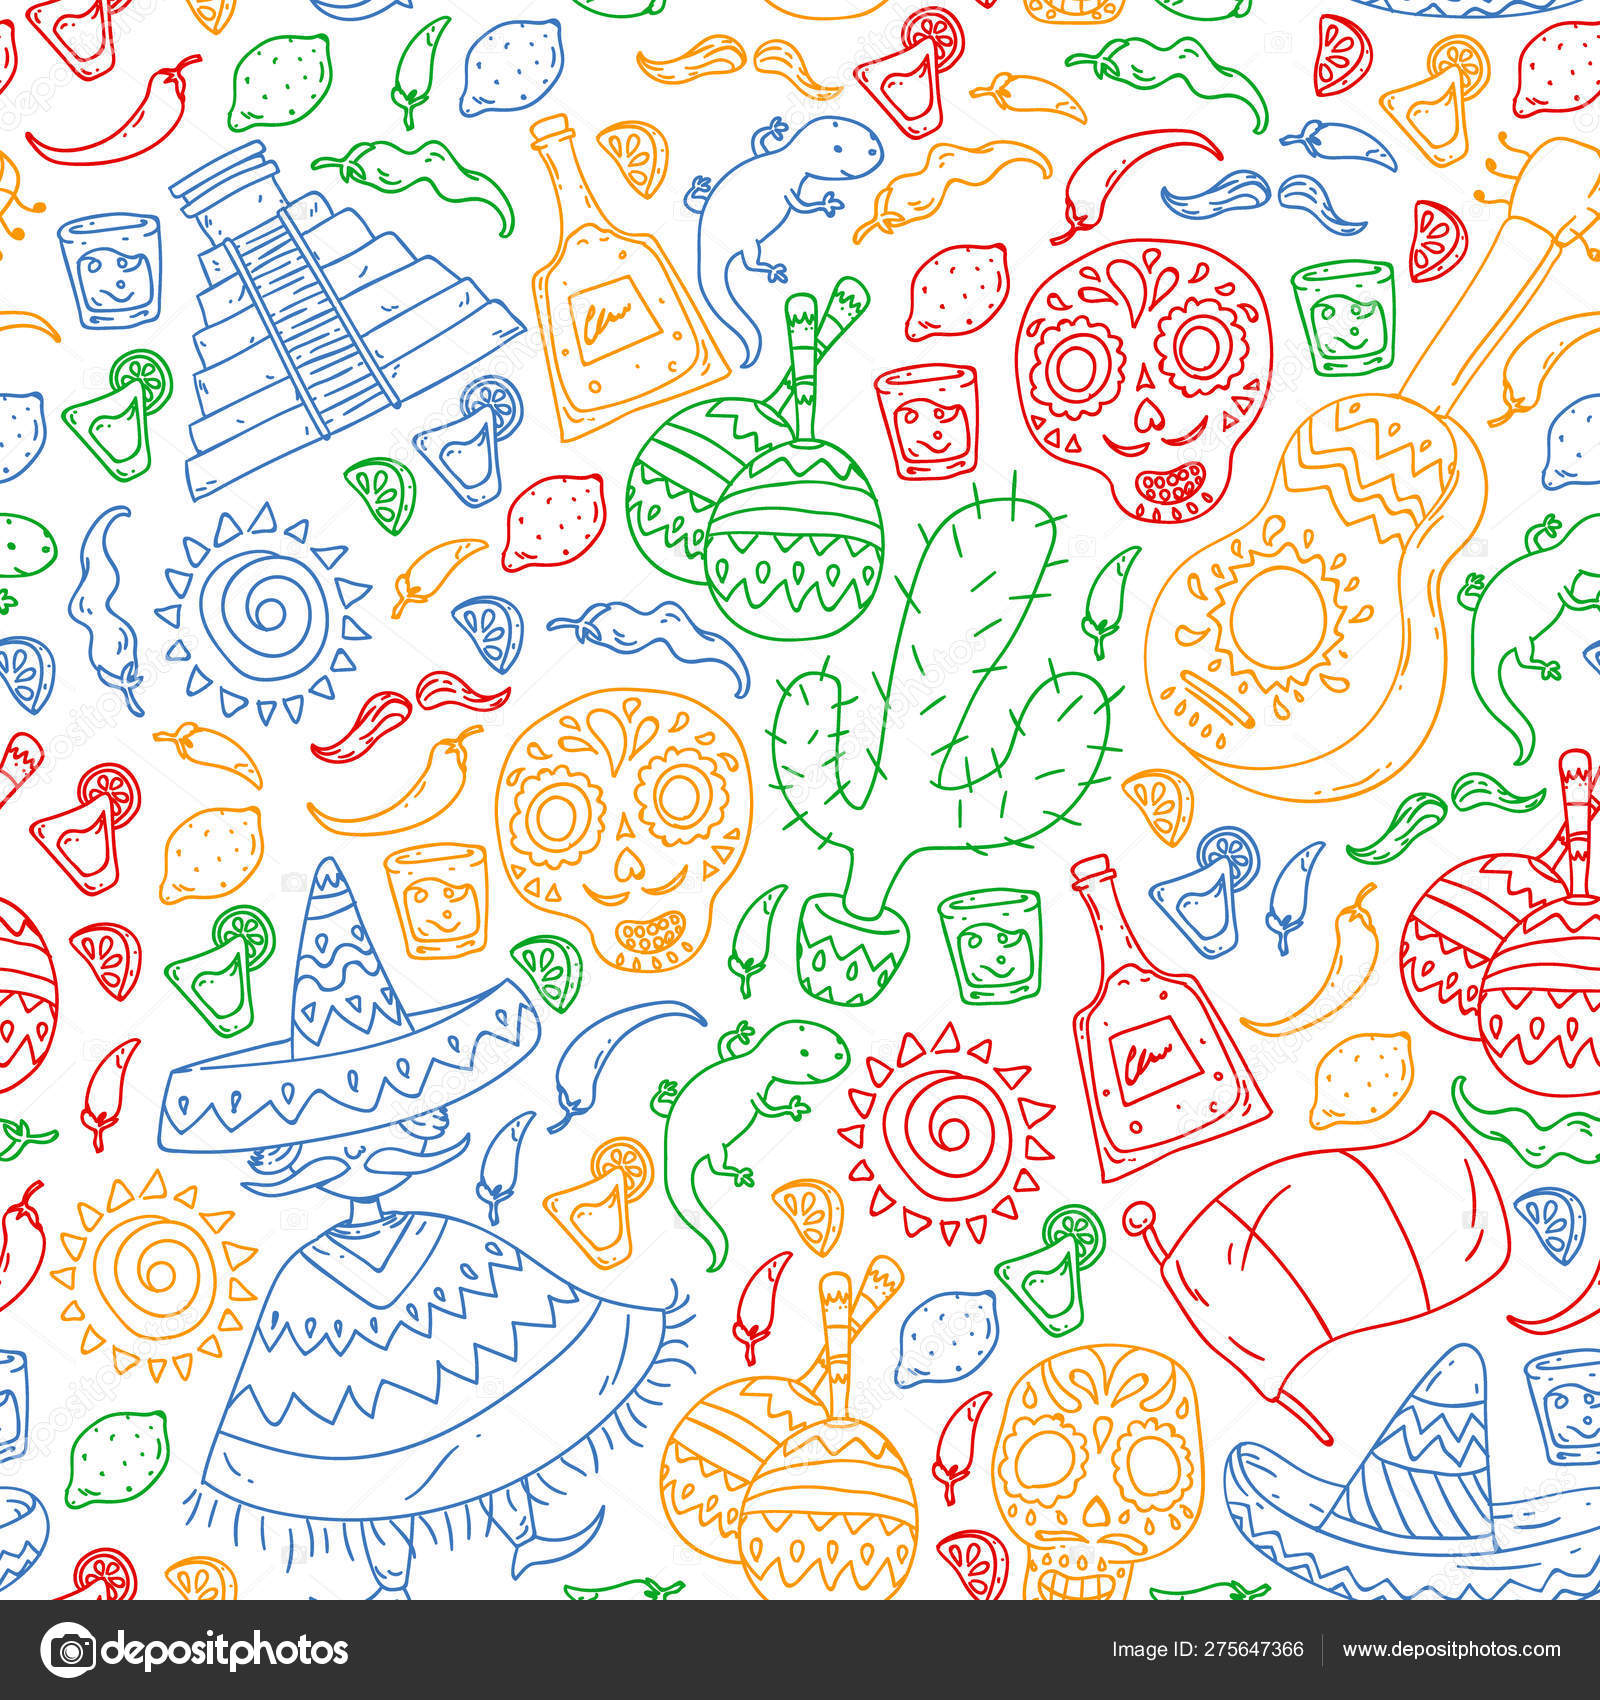 wallpapers and backgrounds,pattern,design,line art,visual arts,coloring book